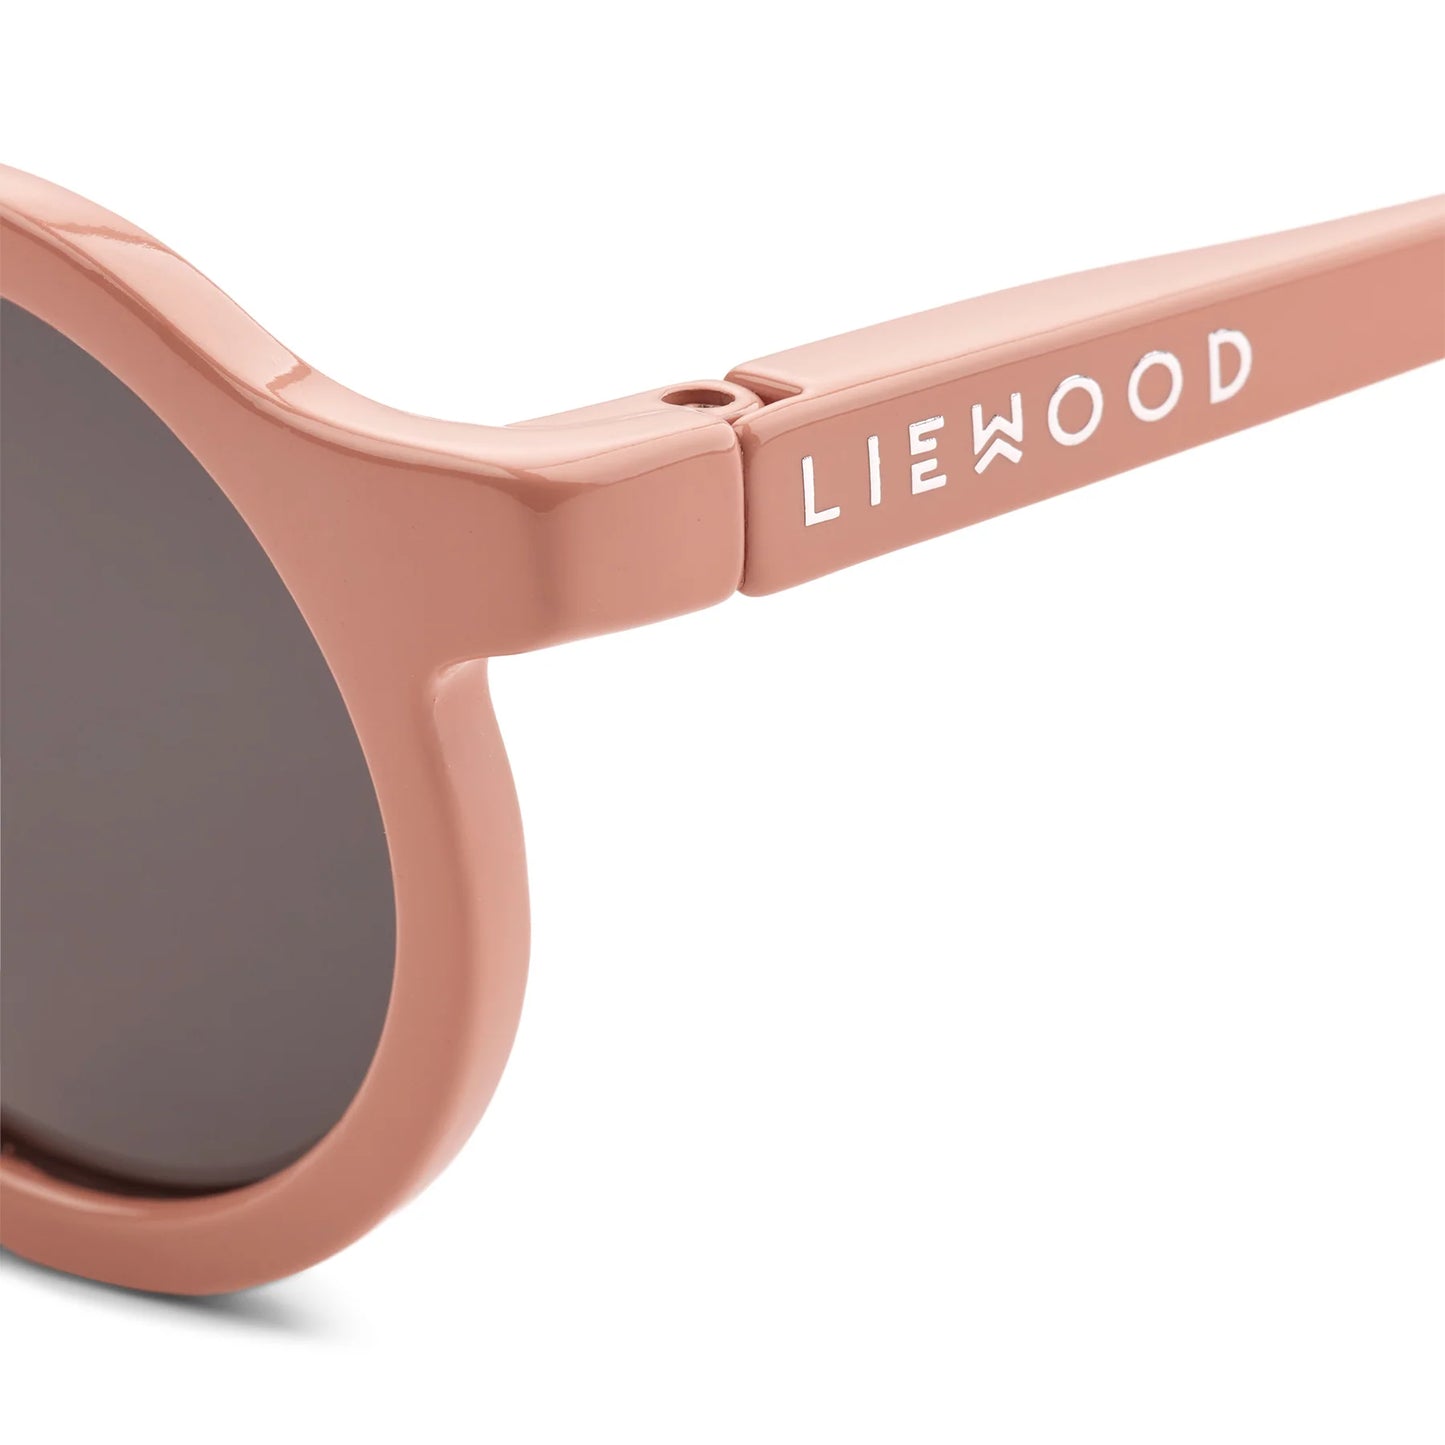 Liewood Darla Sonnenbrille tuscany rose 4 - 10 Jahre